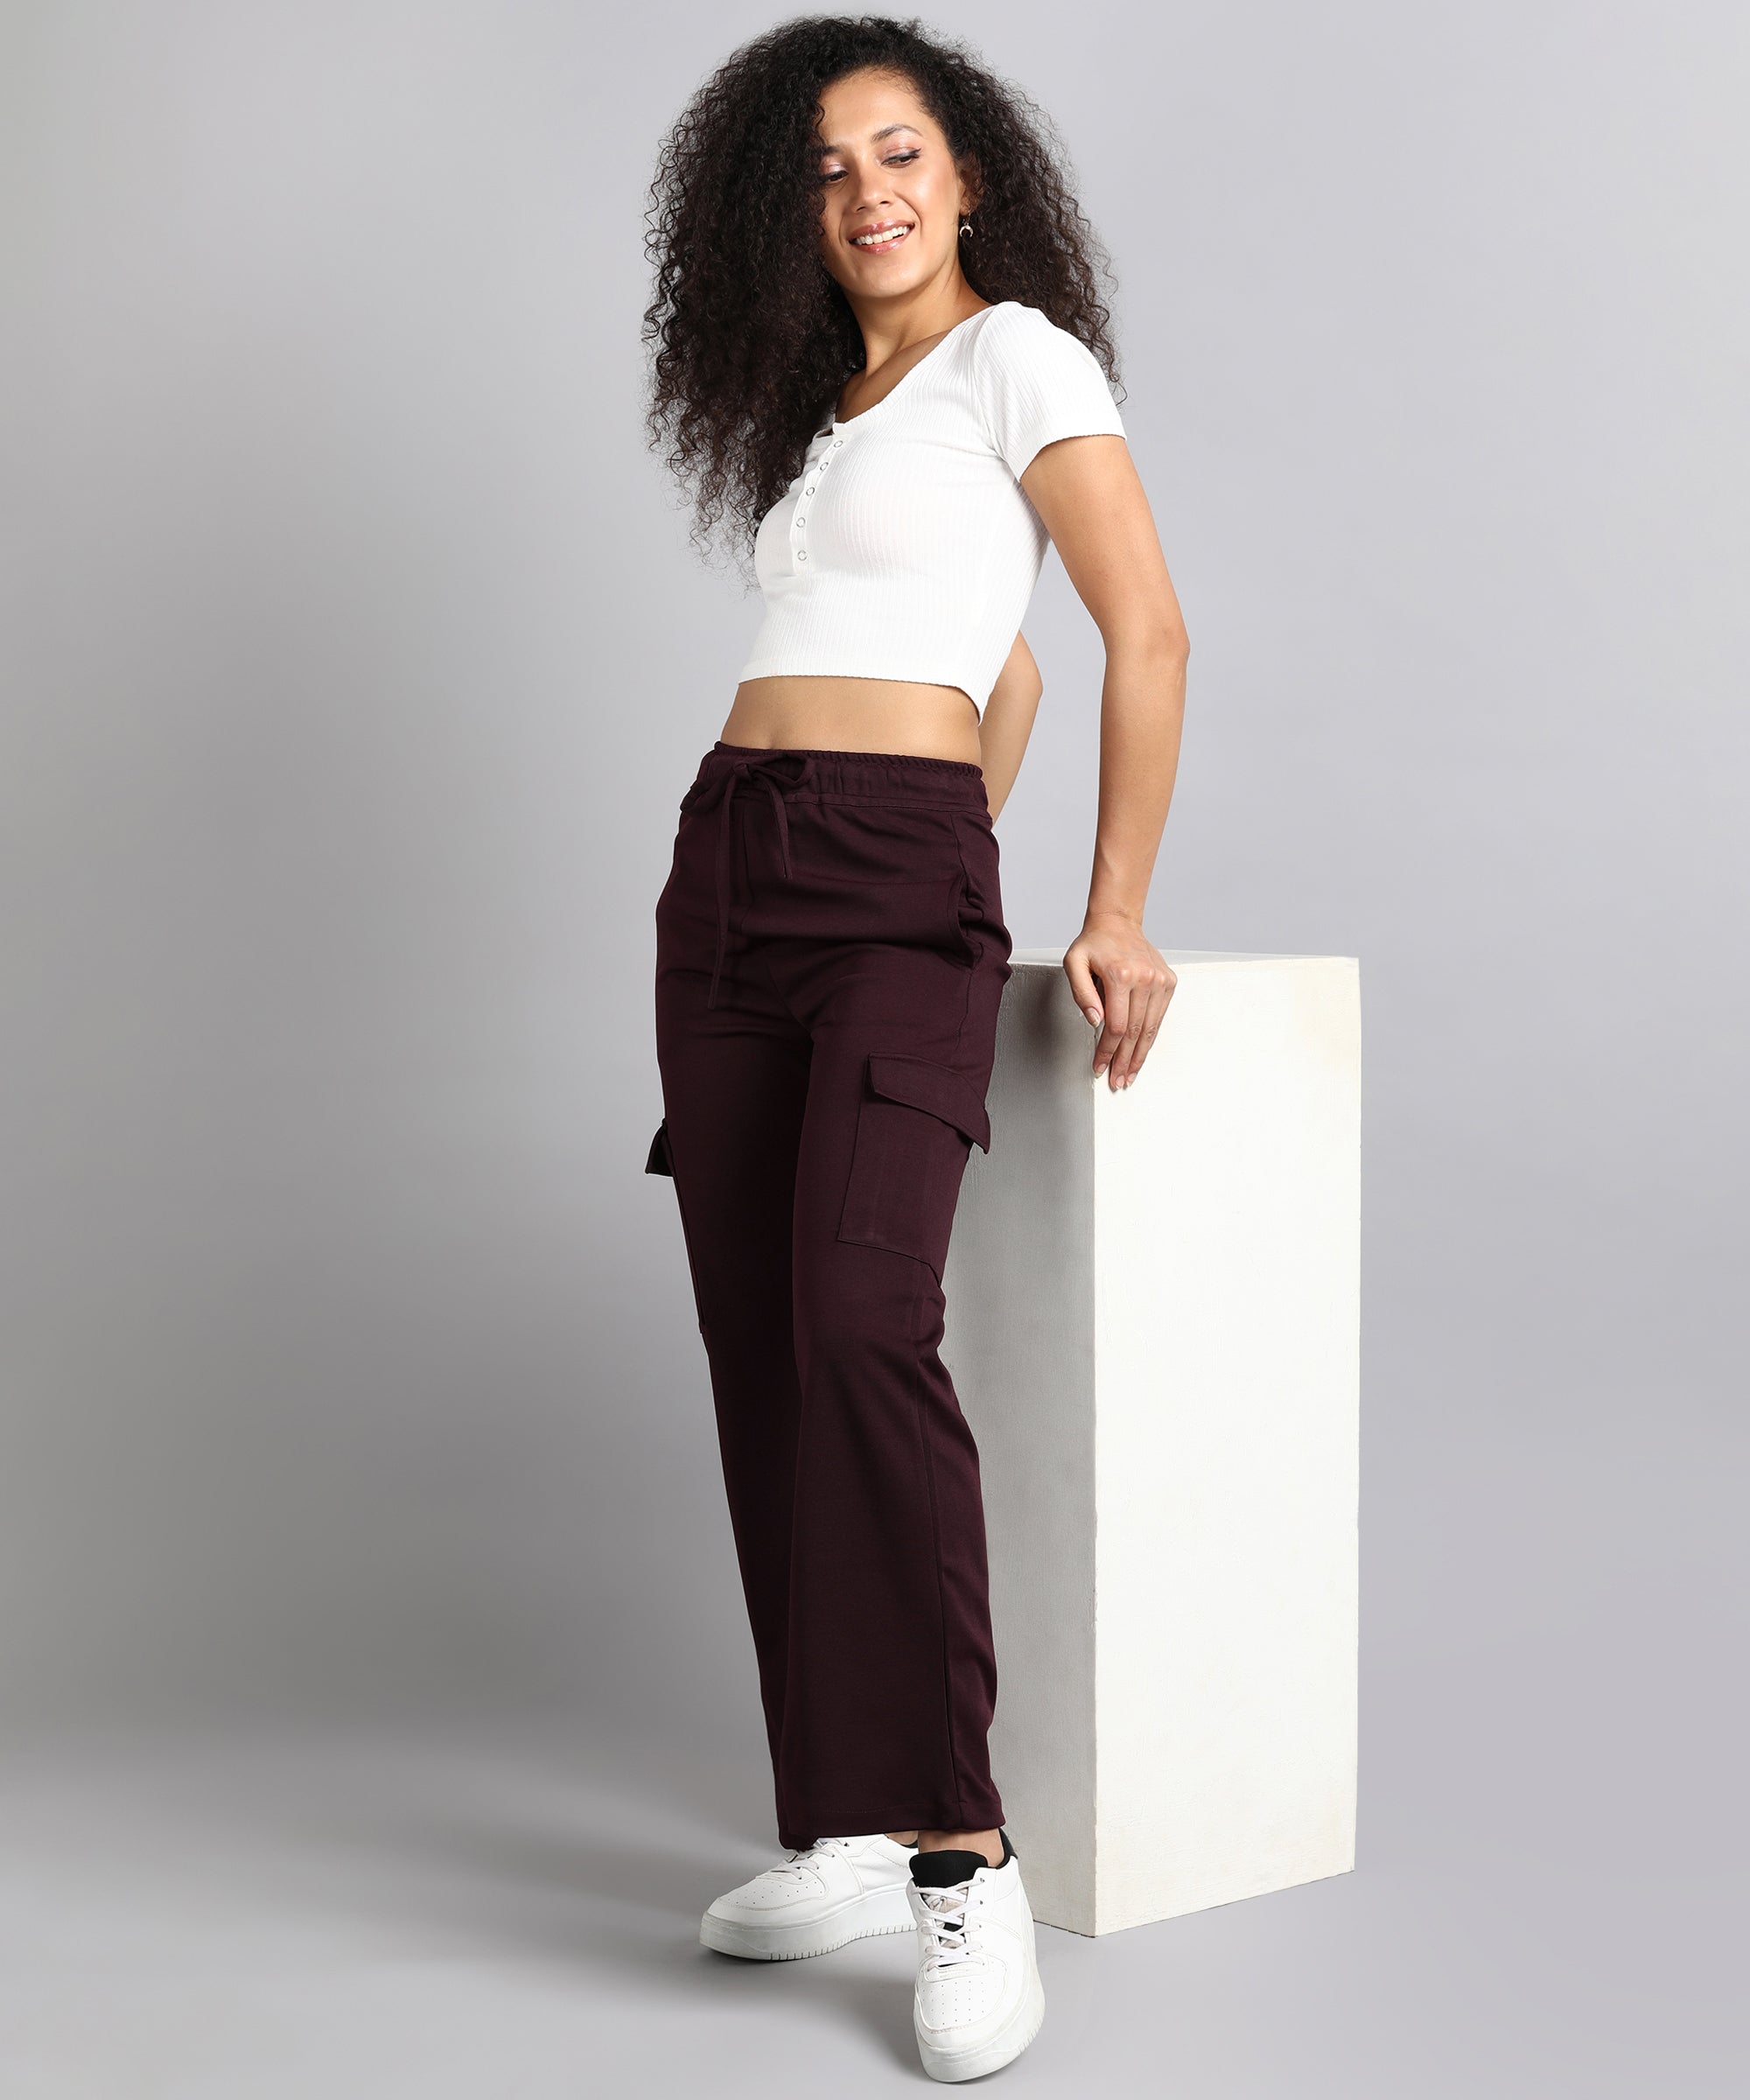 Fall Outfit Series - Gray and Burgundy | Burgundy pants outfit, Maroon pants  outfit, Fall outfits